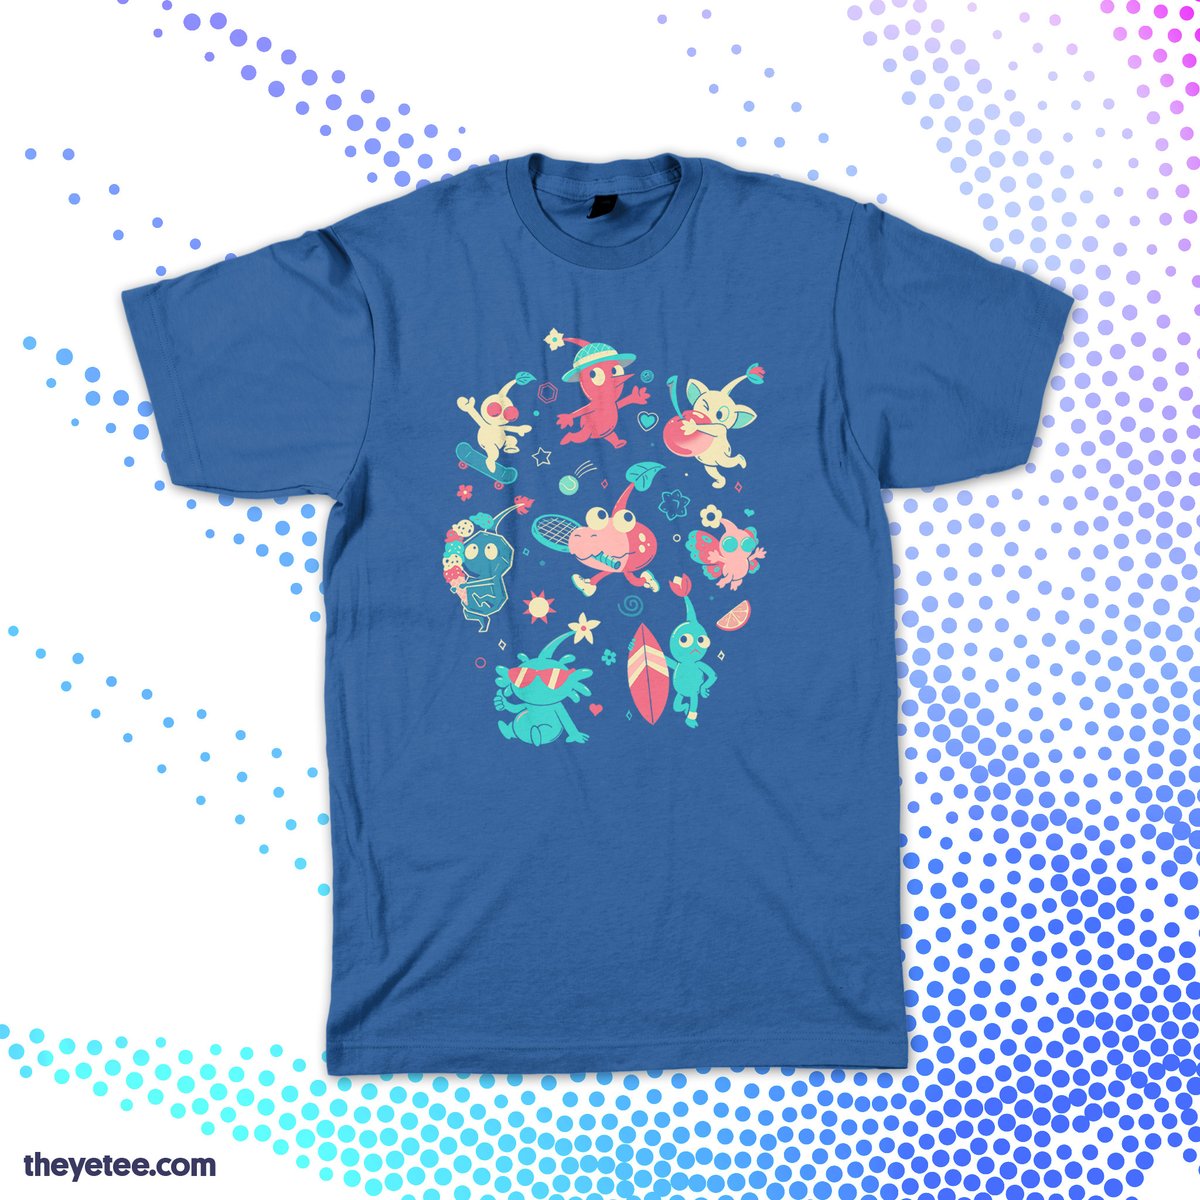 「You wouldn't believe how hard it is to f」|The Yetee 🌈のイラスト